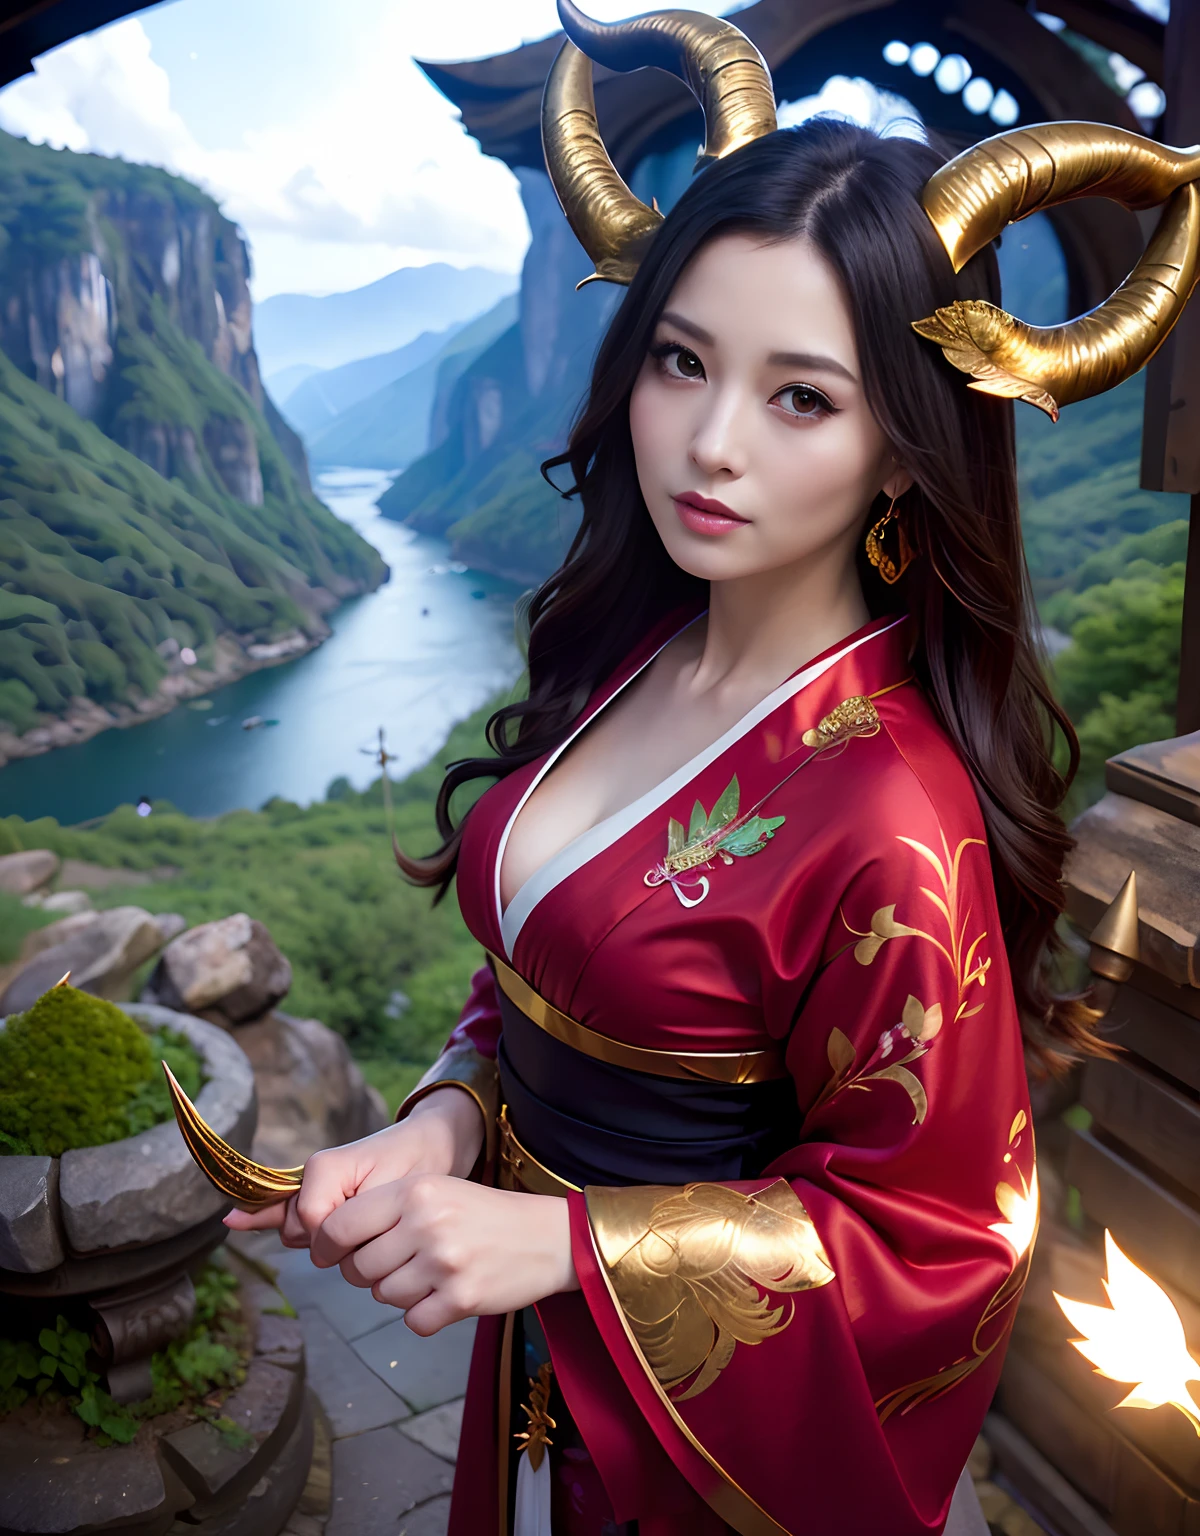 ((World of Darkness)),Professional , ​masterpiece、top-quality、photos realistic , depth of fields 、（sexypose）、(Red maple on full bloom background),（Ultimate Beauty）、A dark-haired、（shrine background)、（Kimono with beautiful pattern）、（Night background）、Beautiful hair ornament on the head、（（Precipitous cliffs））,(Wear a beautiful kimono),（Wear a beautiful kimono with colorful floral patterns）、Jewel Gold Weapon、Particles of light),(Wearing a wizard's hat）、Gorgeous gold weapons ,Castle background、（（ Gorgeous Dragon Sword）） , （a dark night）,,（maikurobikini） 、（（Black Haired Beautiful Girl））、（Castle background）、（demonic wings）、（（Gangle's forest background））、Beautiful Caucasian beauty、１a person、dynamic ungle,(((Two devil's horns on the head)))、Smaller head、Idle Smile、Thin and beautiful female handystical expression、Light Effects、intense fighting、Wind-effect、magic circles、With the legendary magic wand、Dragon's tail、